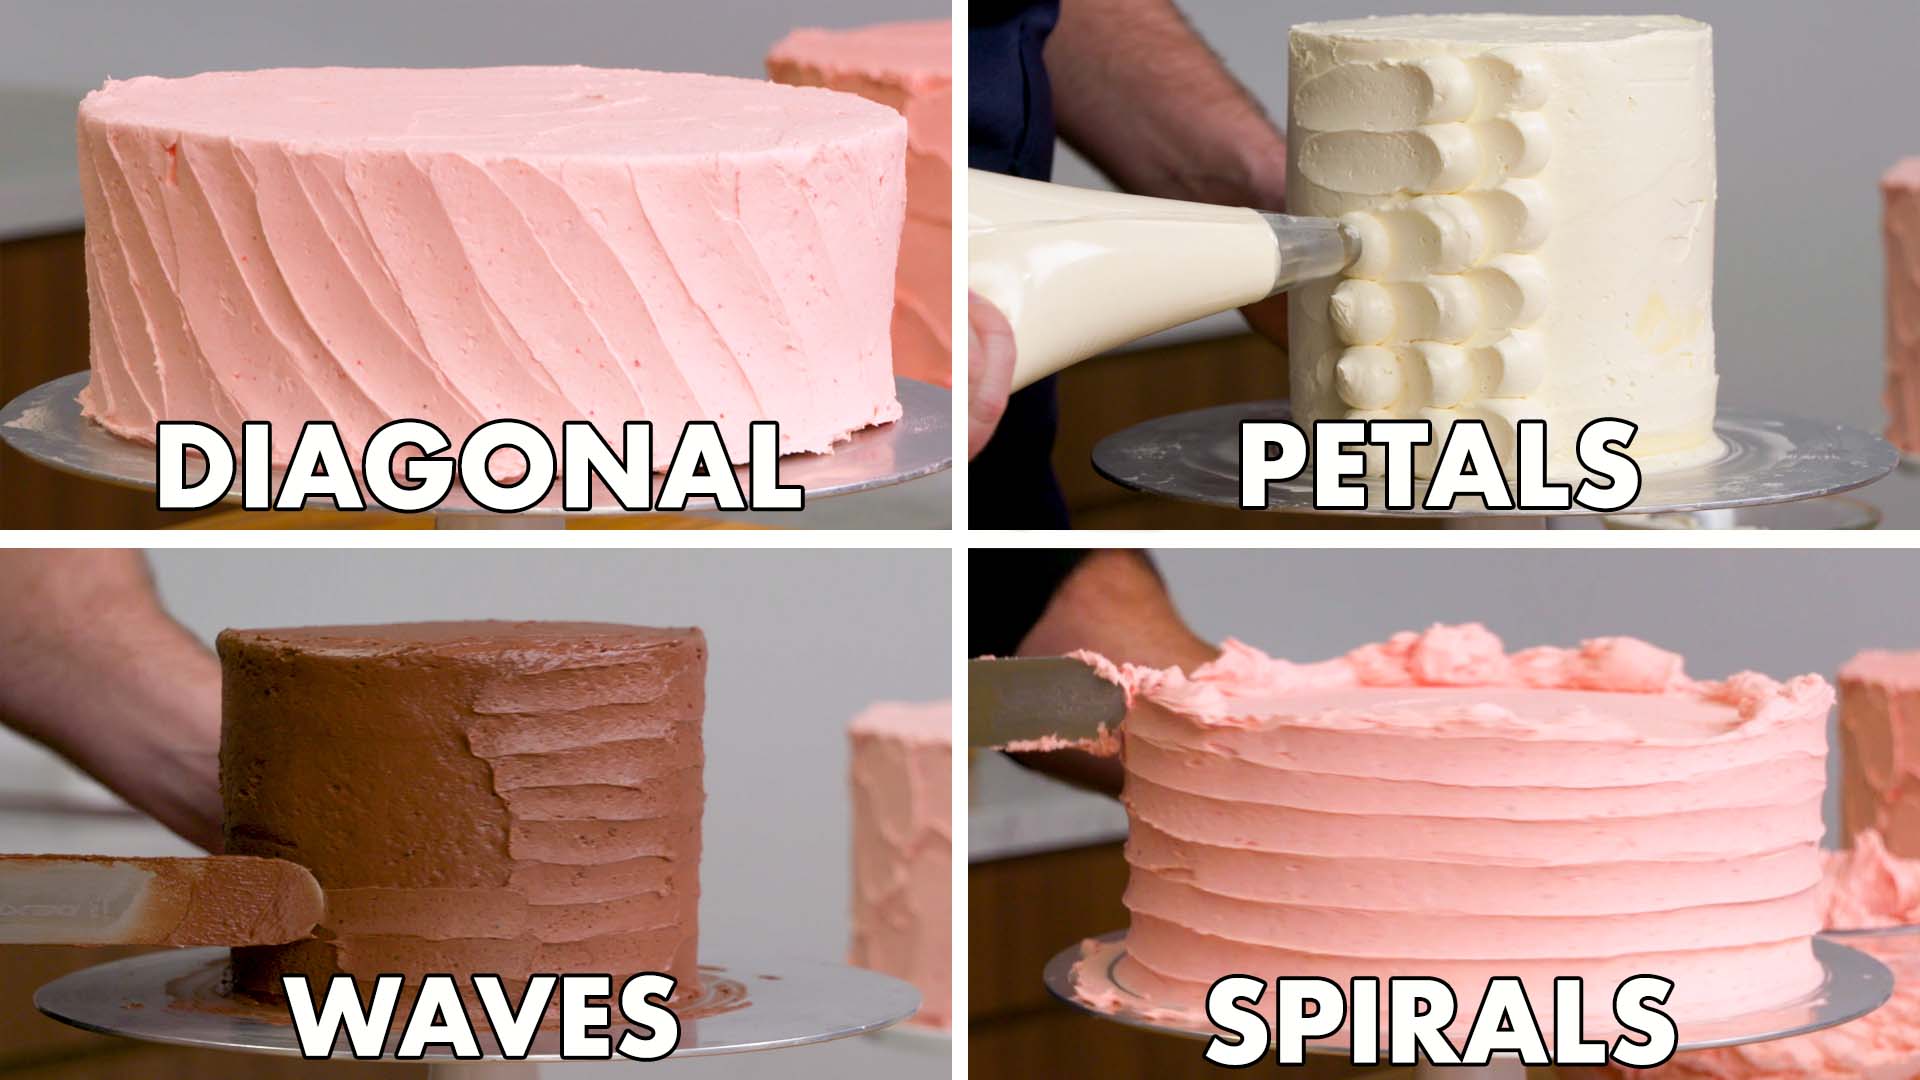 Watch How To Make Every Cake, Method Mastery